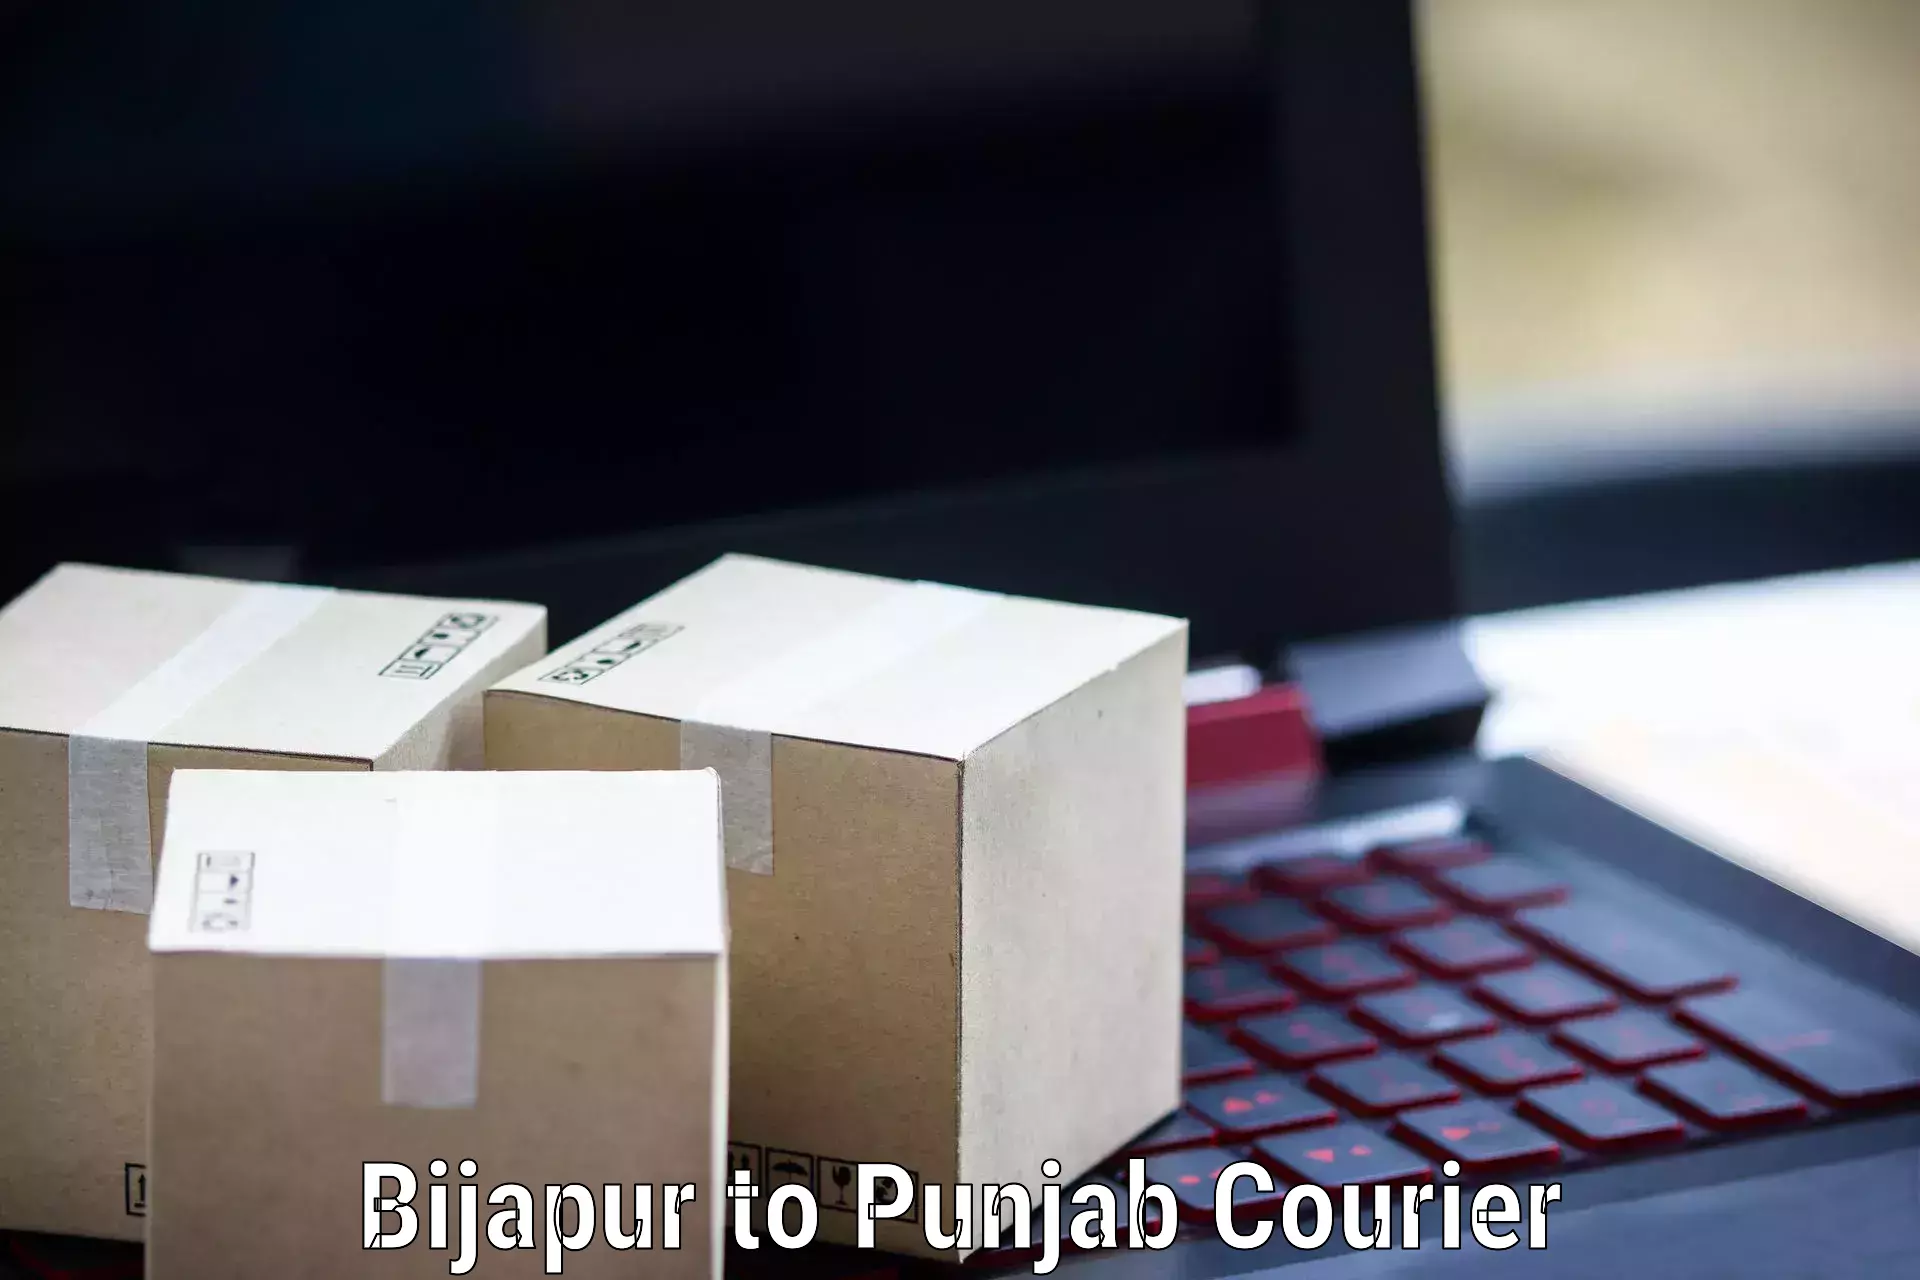 Next day courier Bijapur to Mohali